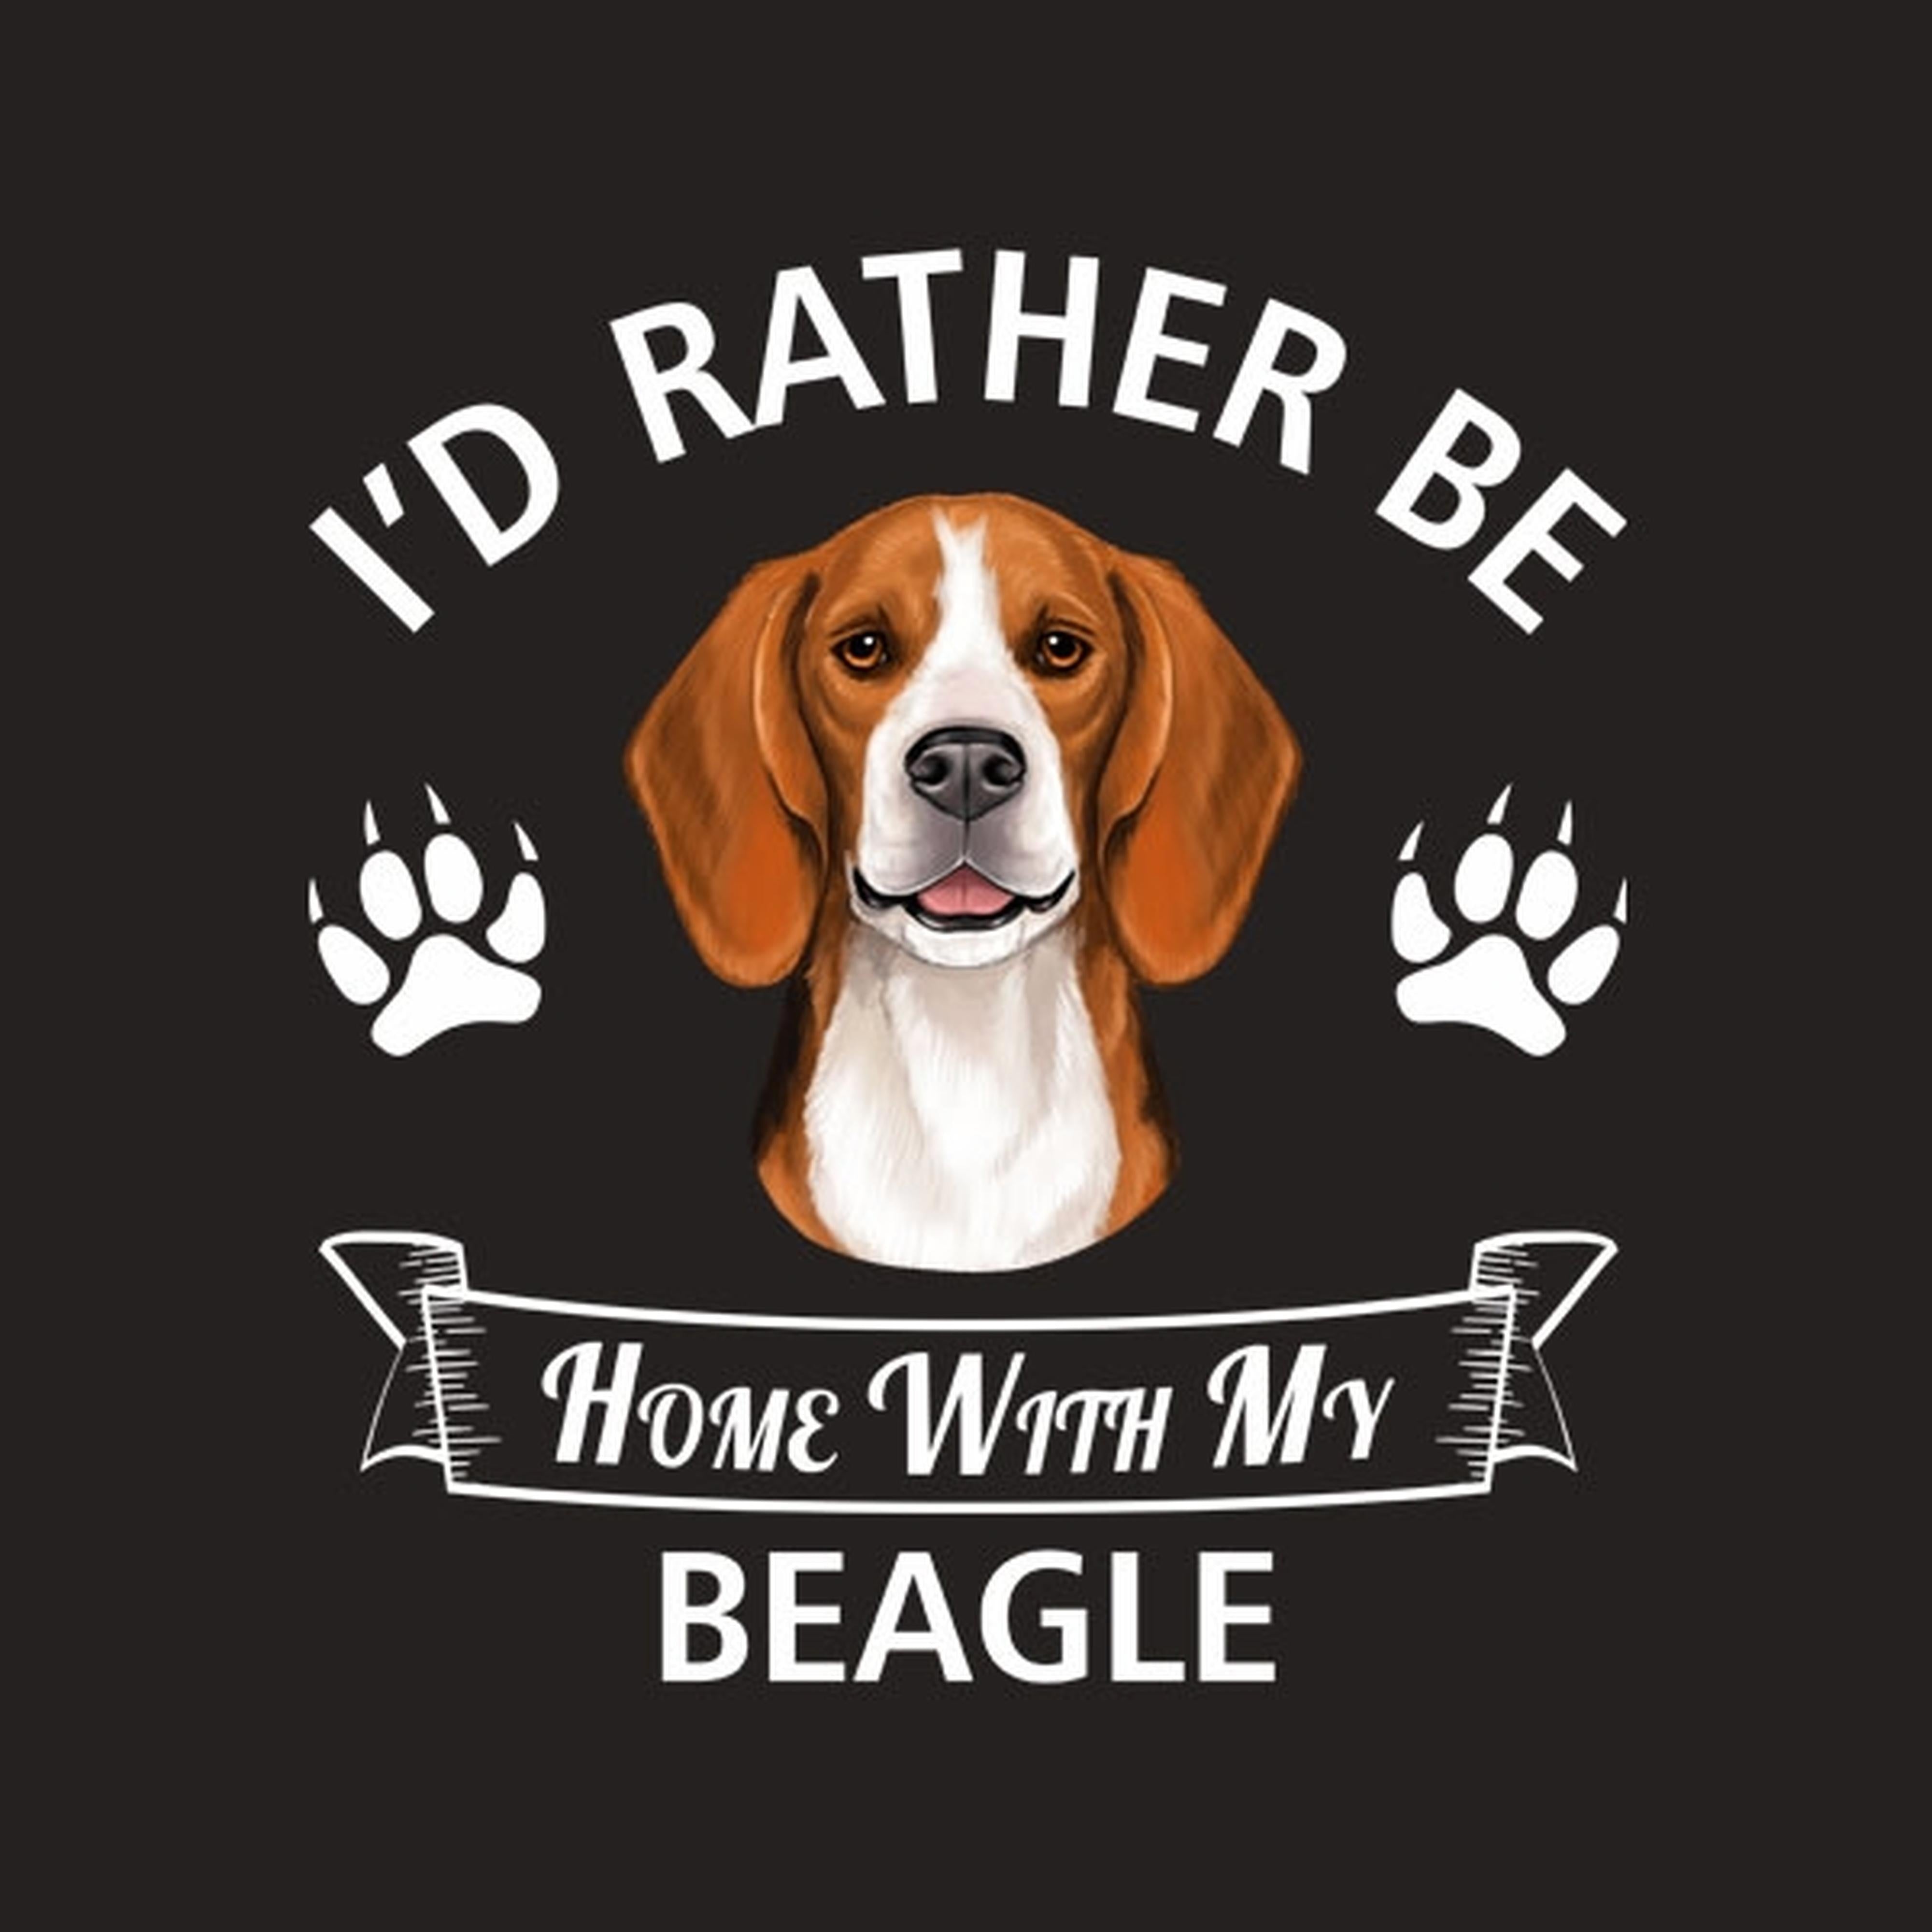 I'd rather stay home with my Beagle - T-shirt